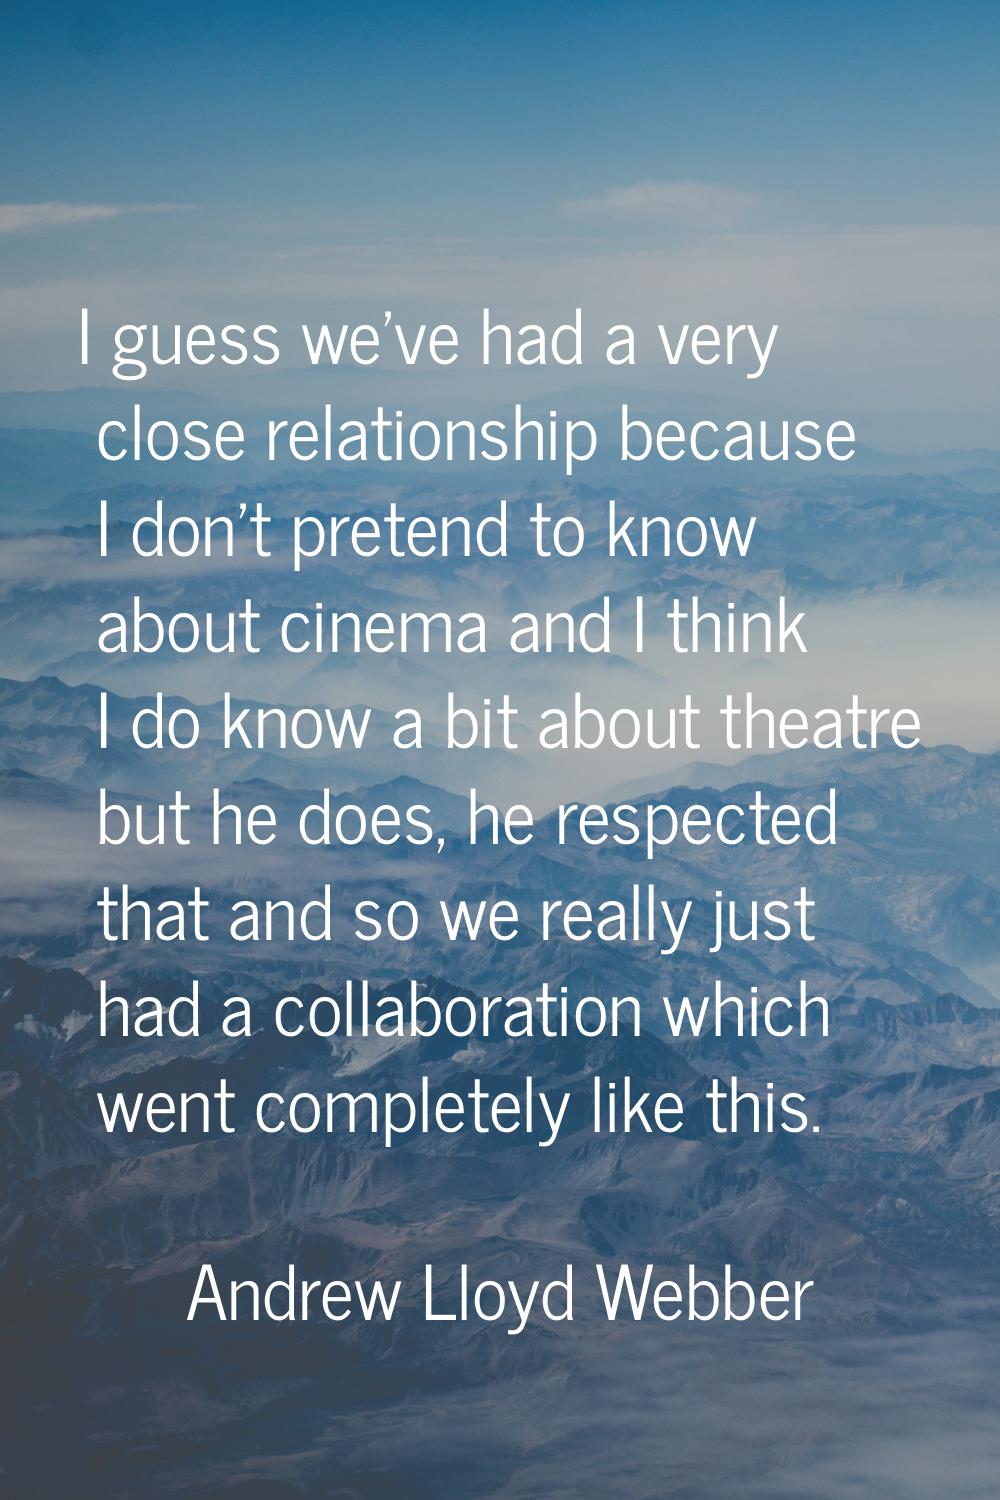 I guess we've had a very close relationship because I don't pretend to know about cinema and I thin